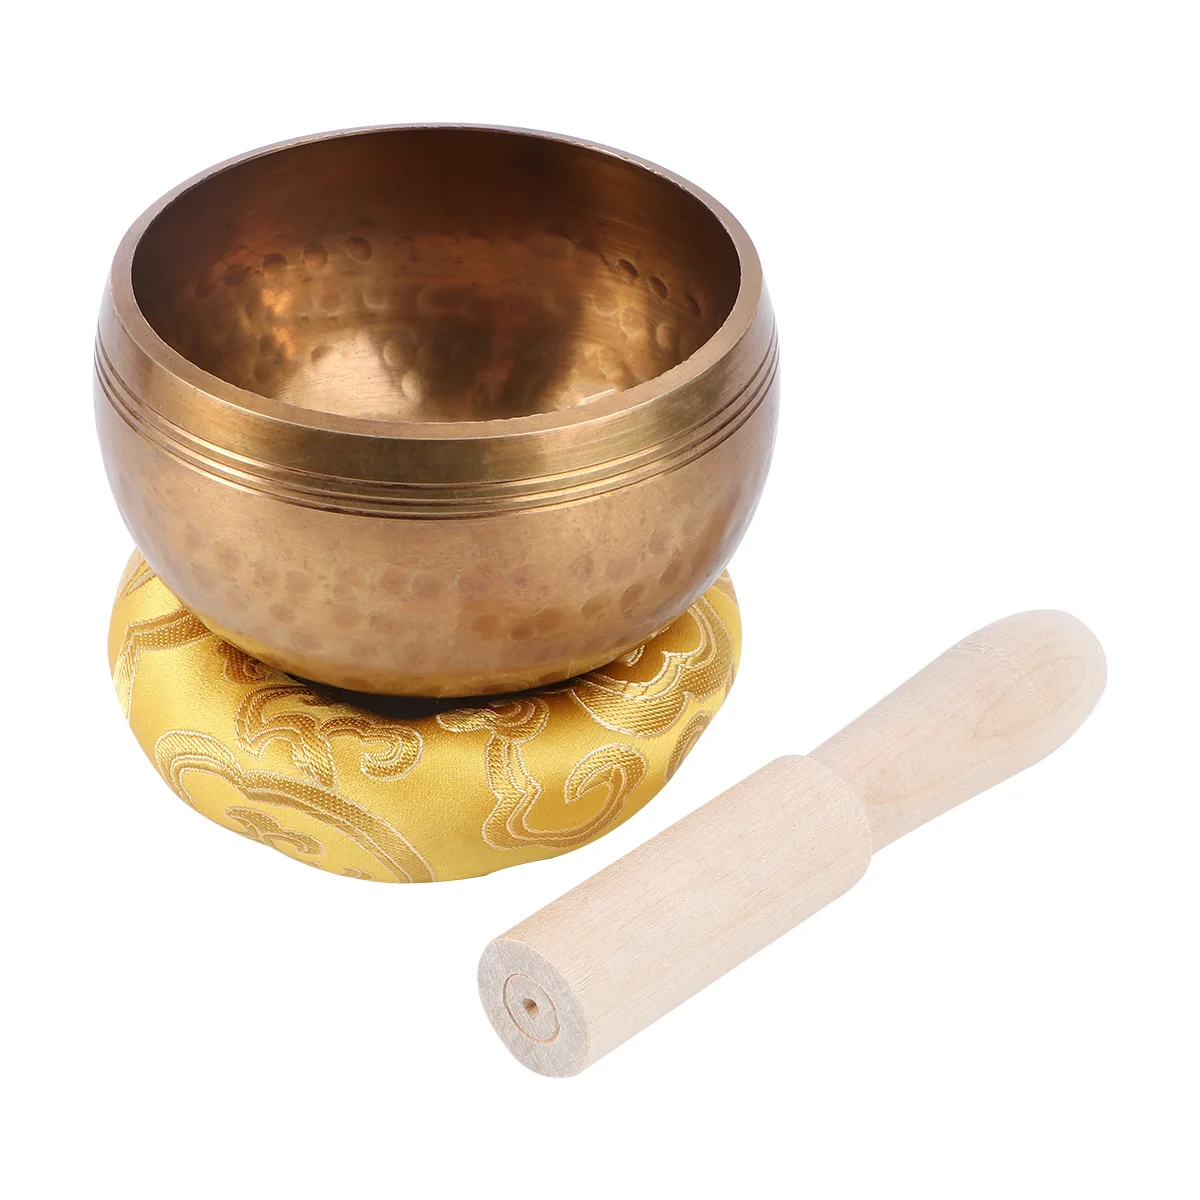 

Tibetan Singing Bowl Meditation Bowl with Mallet for Meditation Yoga Relaxation Chakra Prayer and Mindfulness with Wood Gasket